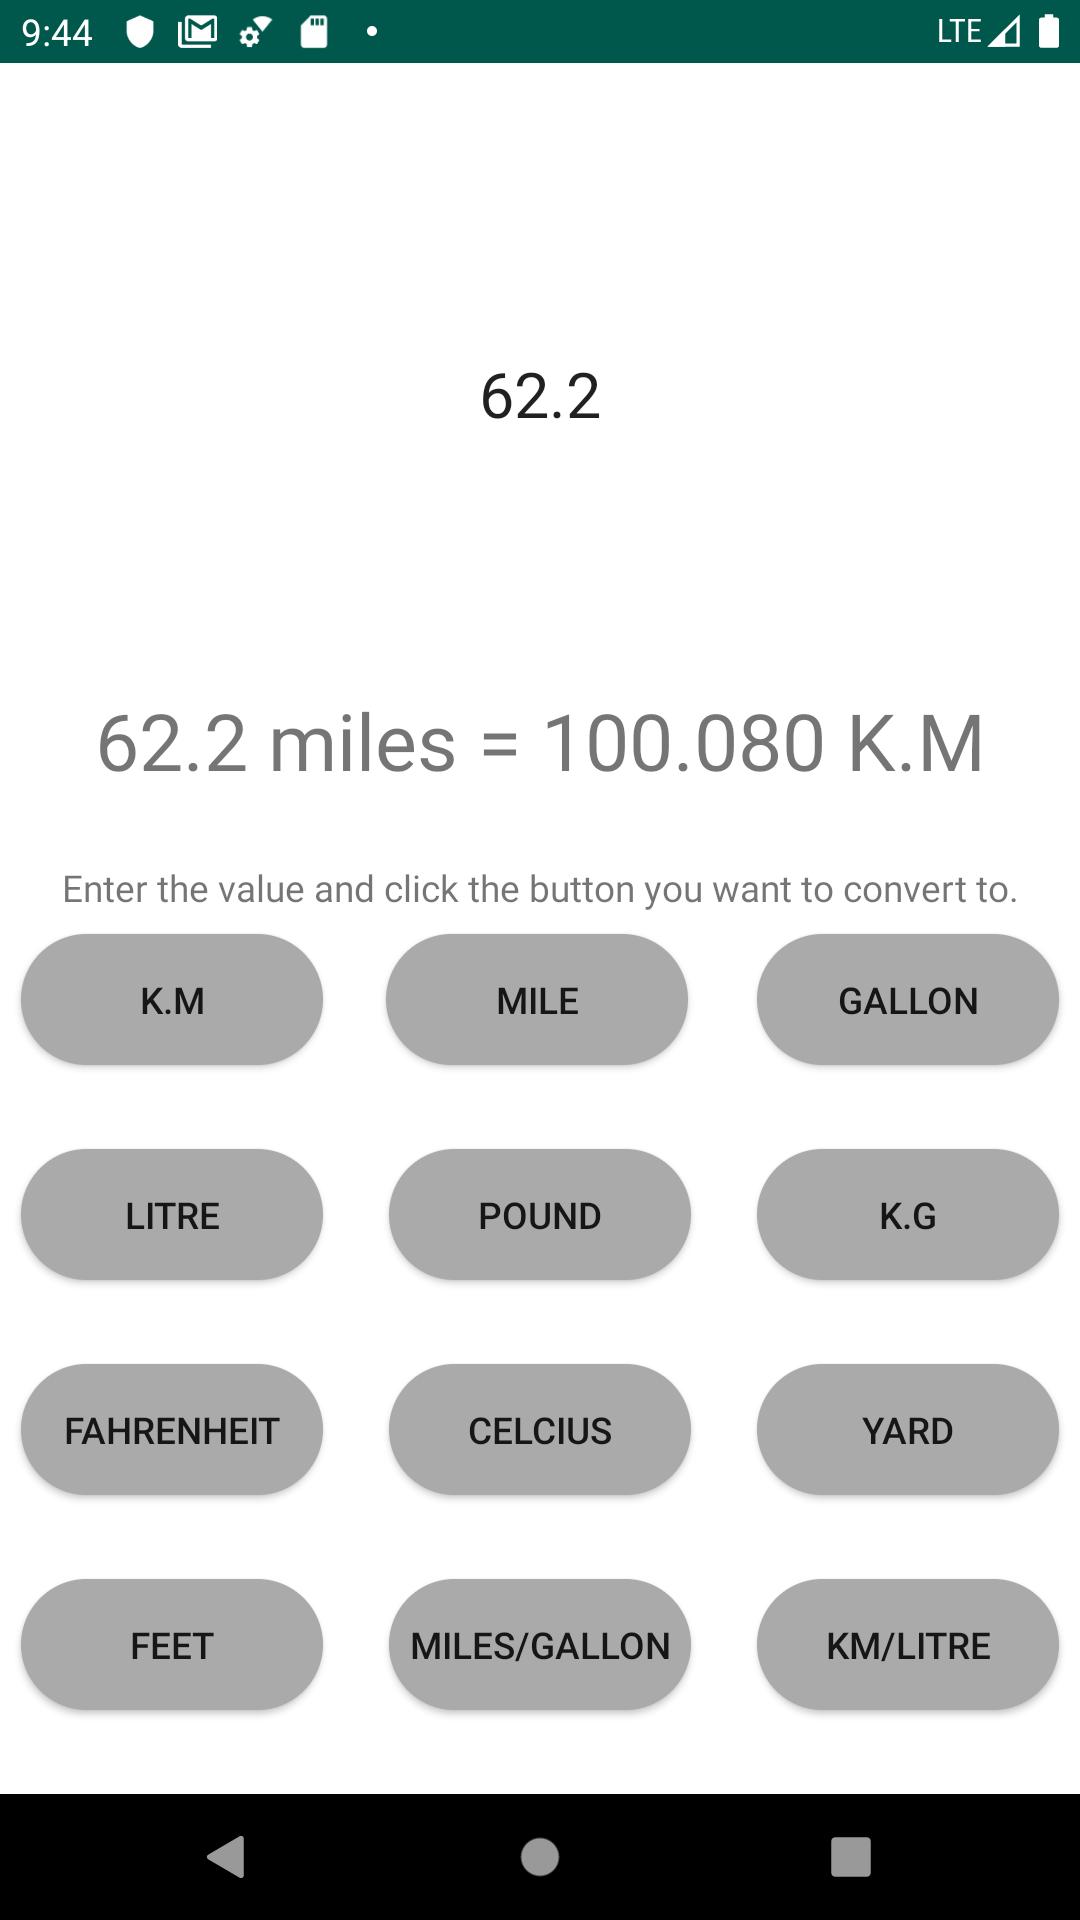 US/Metric Conversion - Travel Companion for Android - APK Download